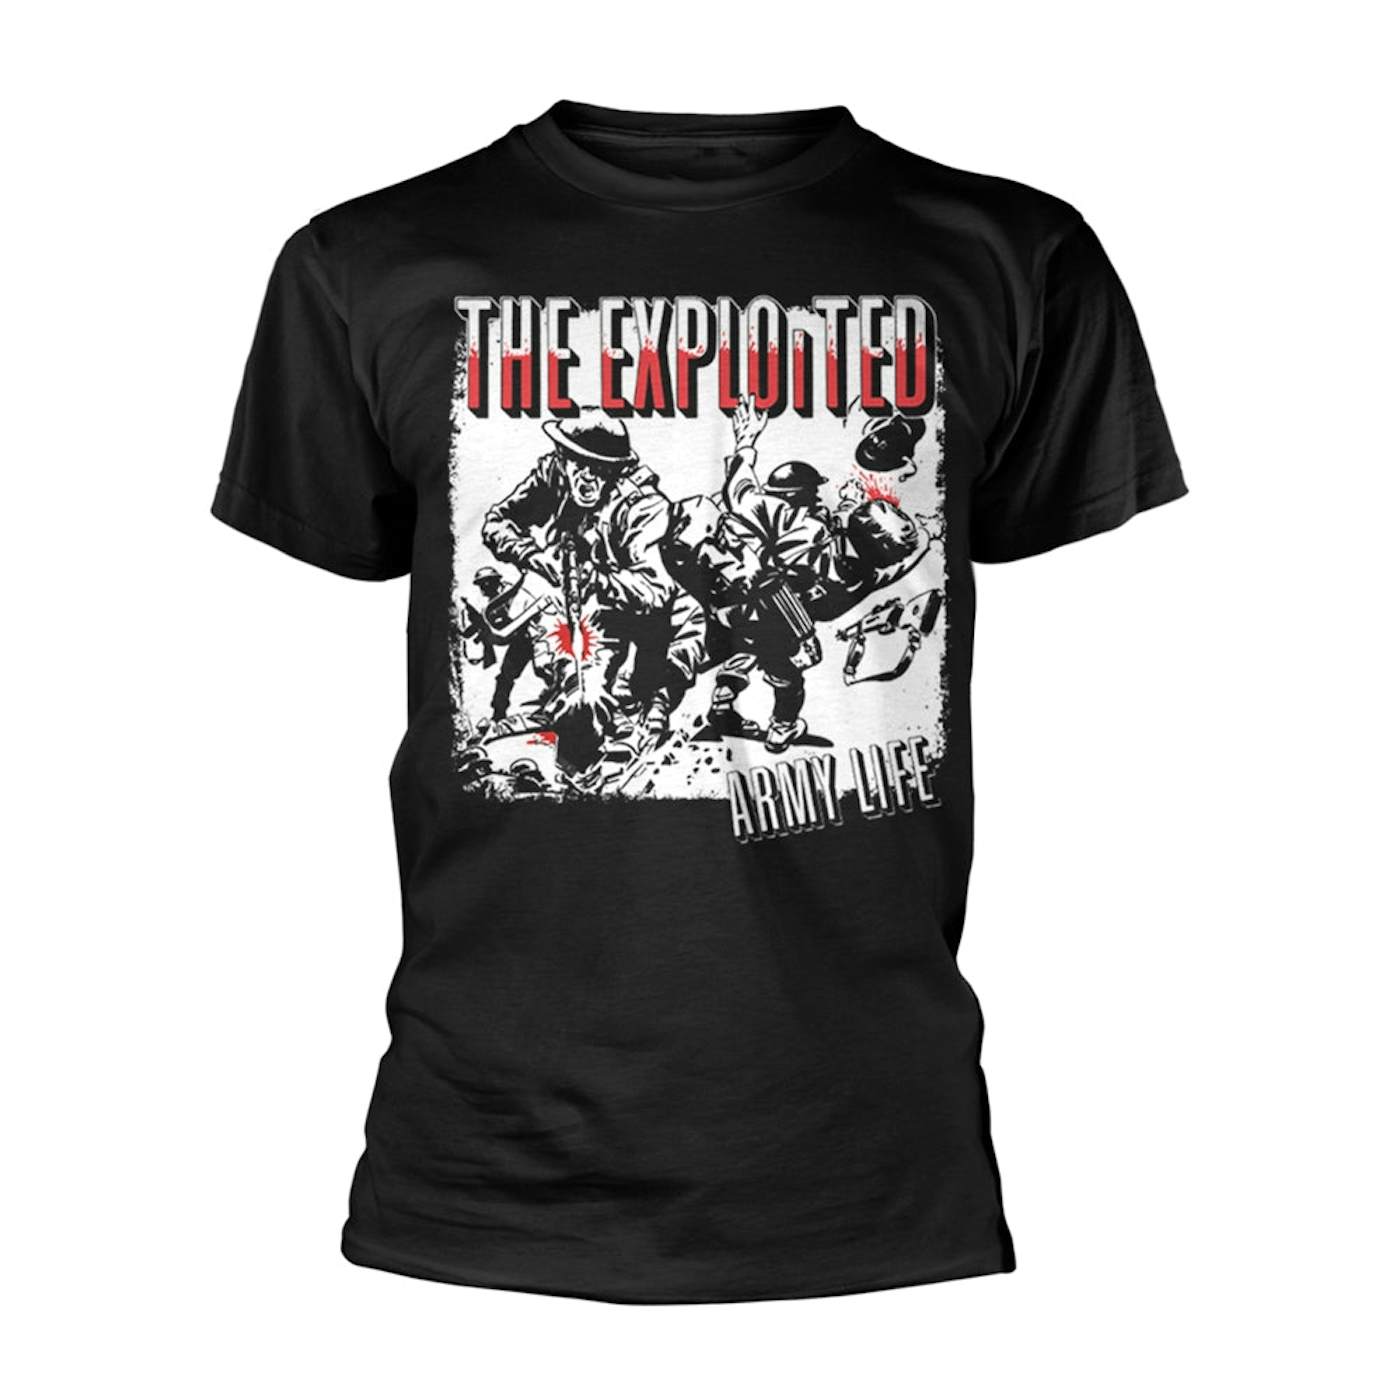 The Exploited T Shirt - Army Life (Black)